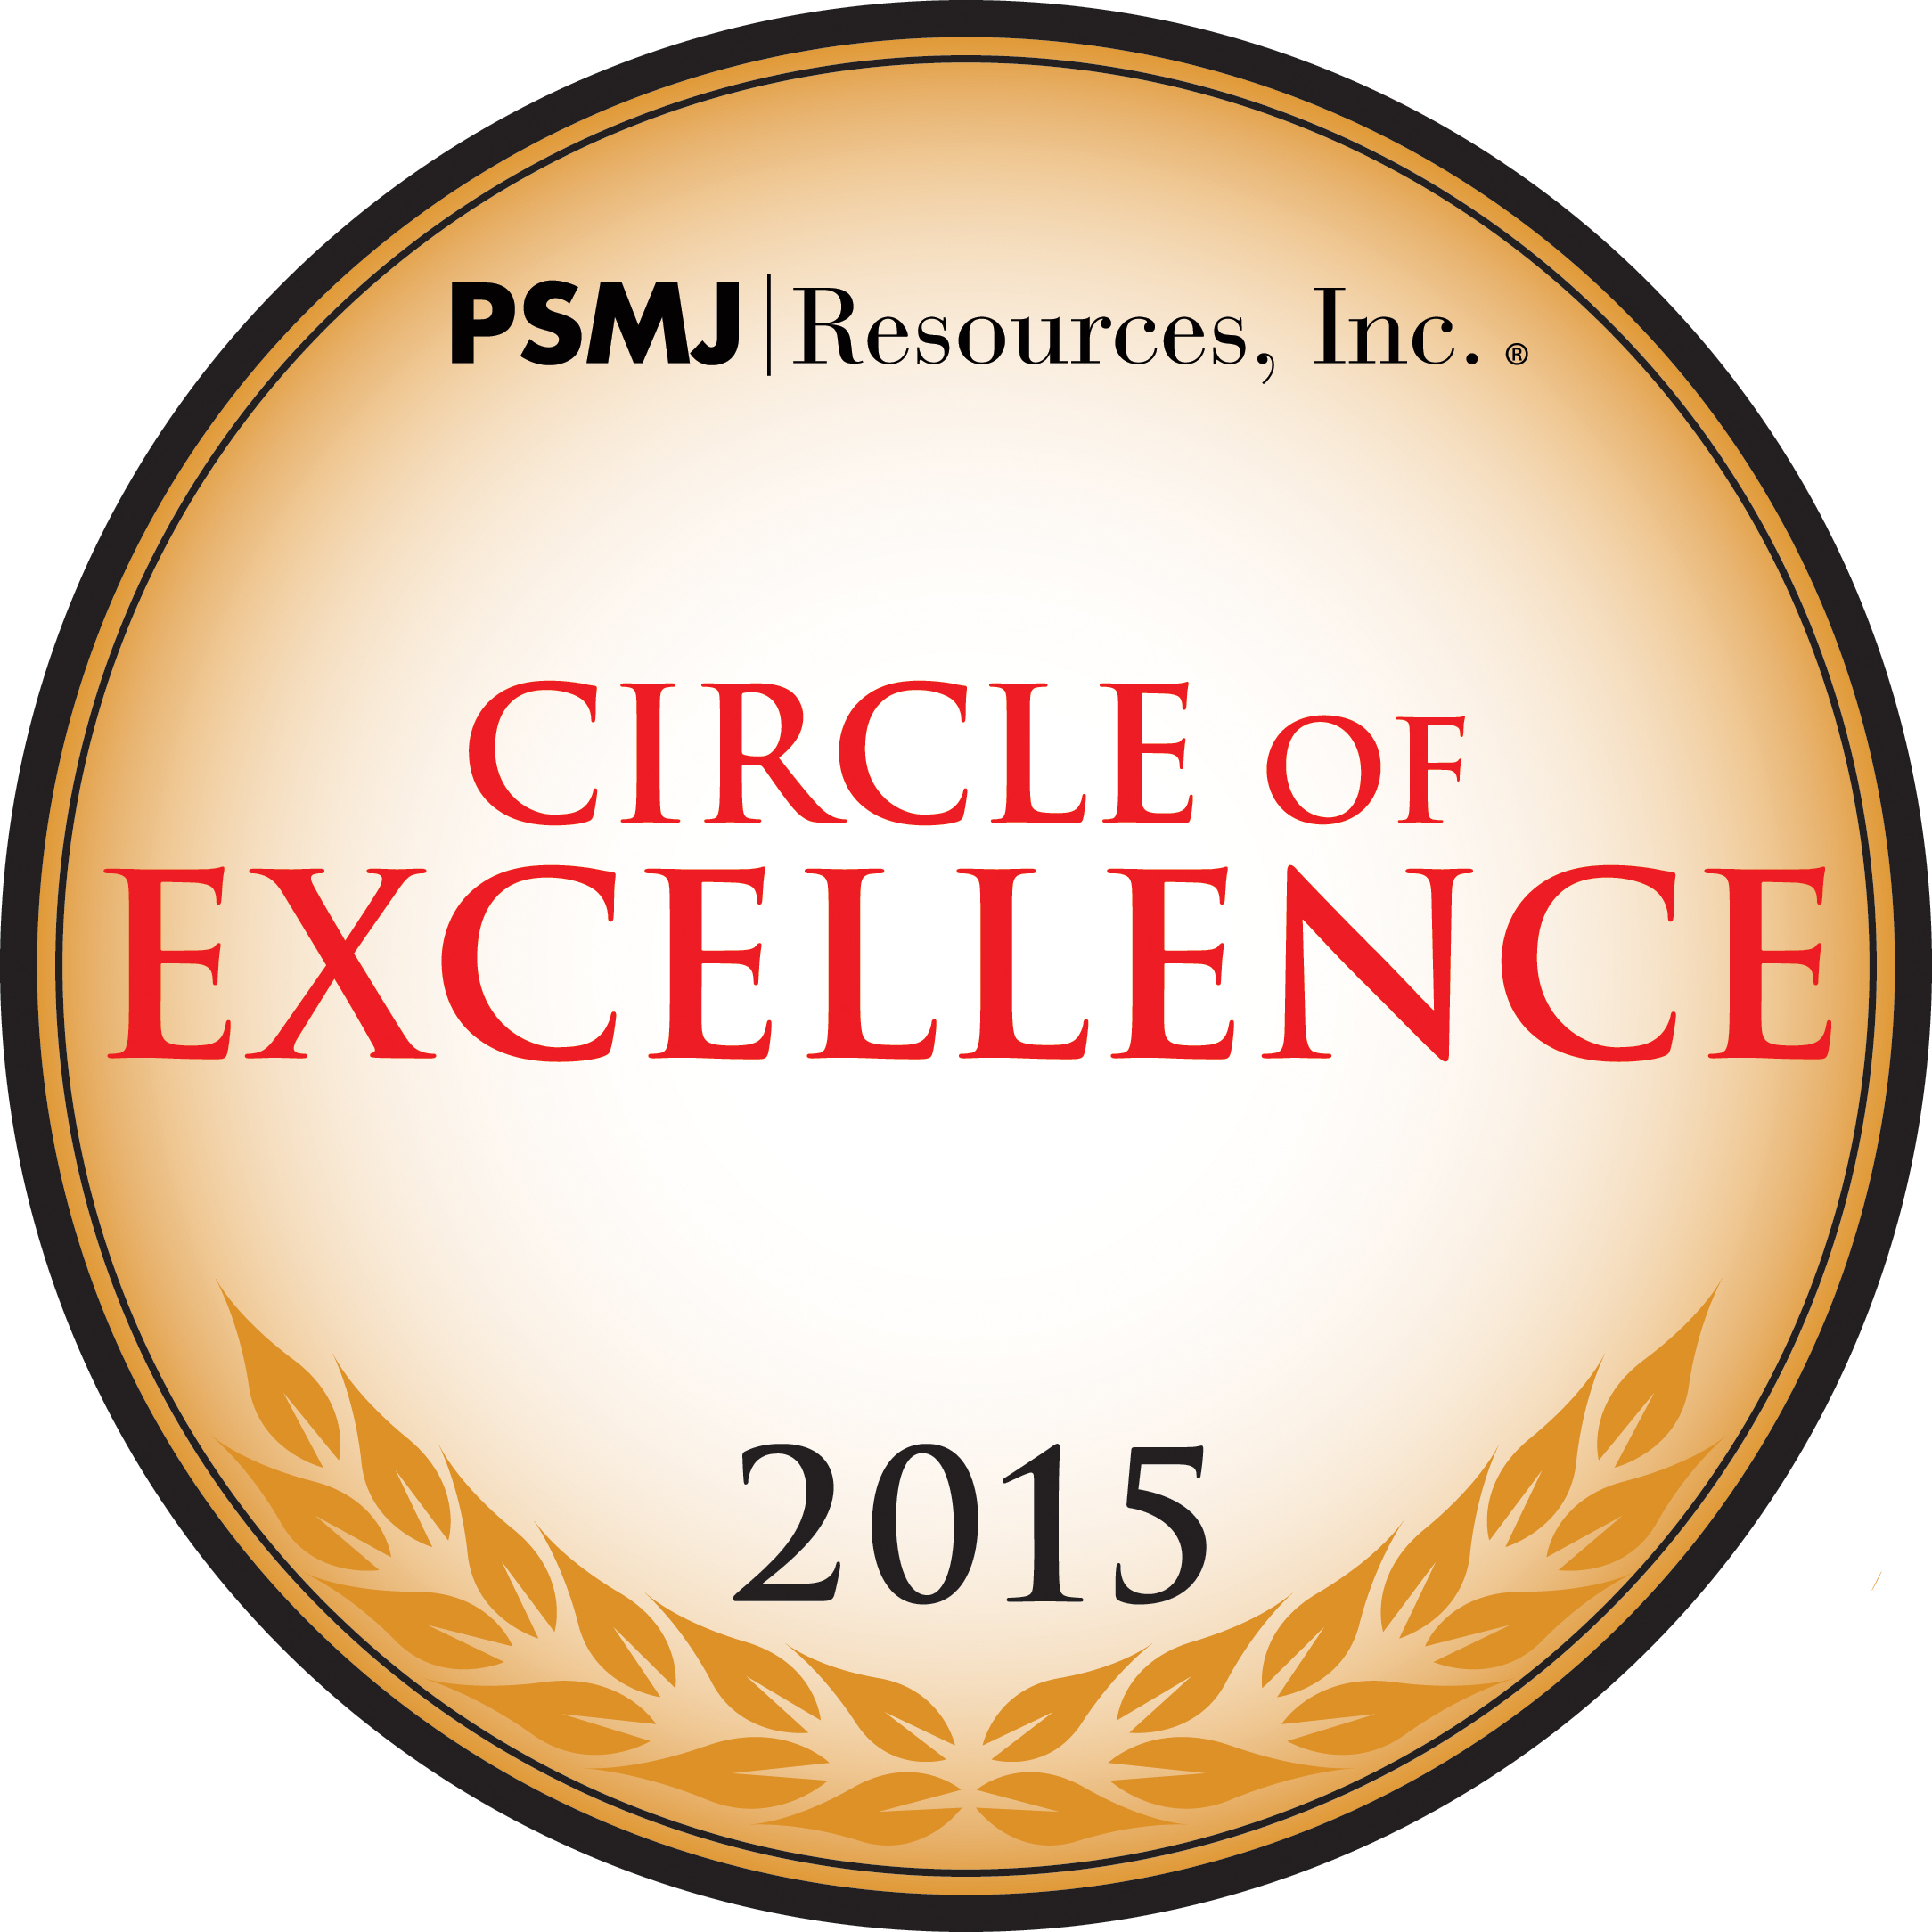 PSMJ Circle of Excellence 2015